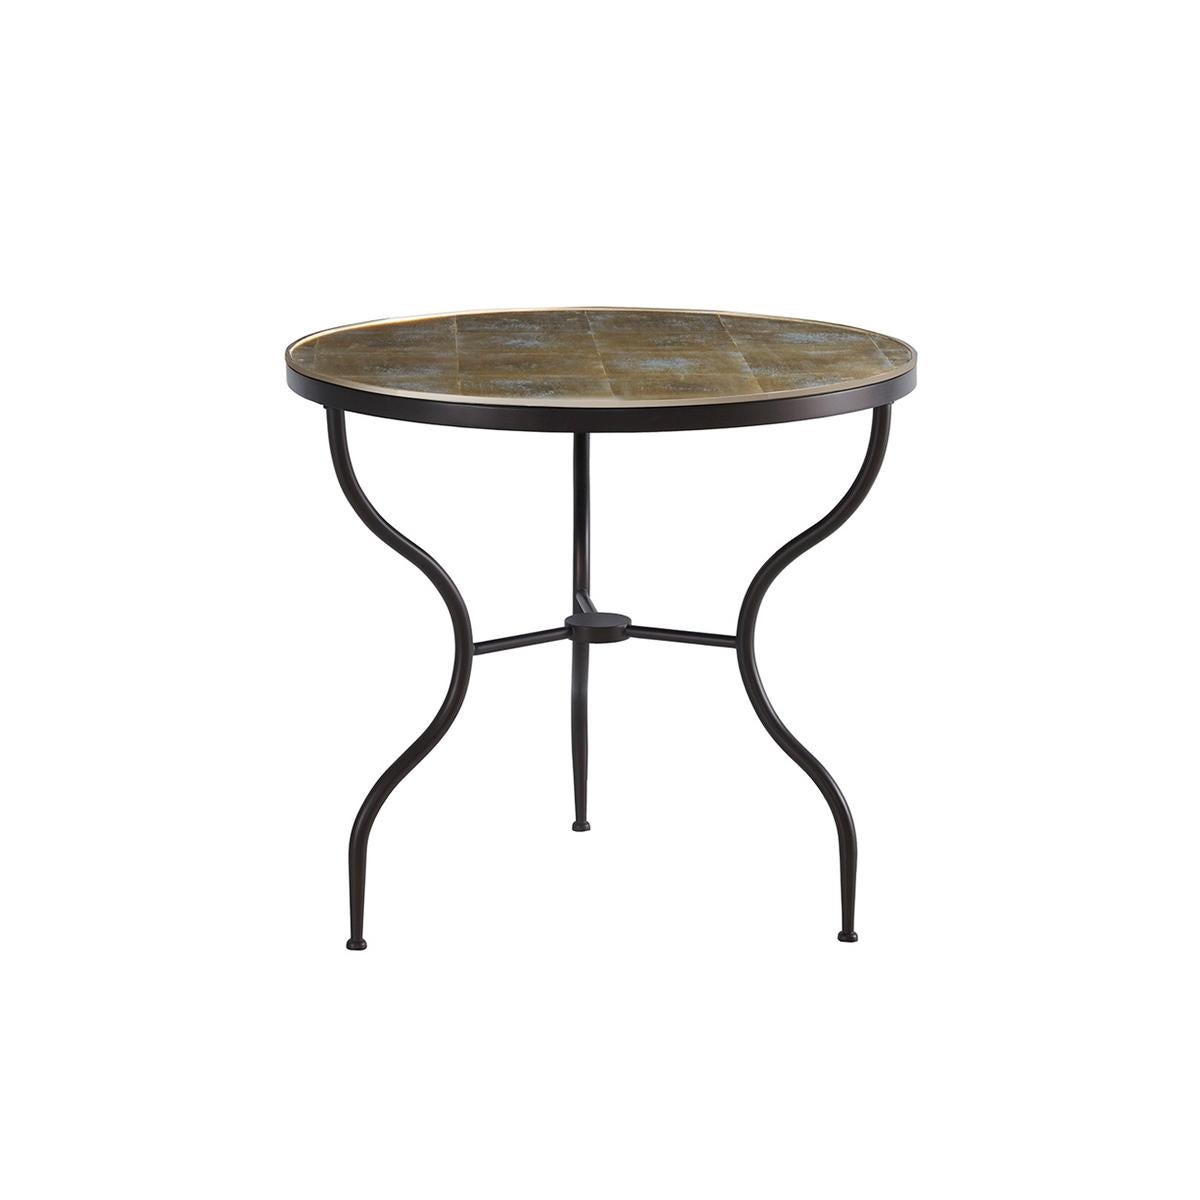 Mid-Century Round Eglomisé Side Table with a gold leaf detailed eglomisé round top having a brass trim edge above a three-legged wrought iron ebonized base.

Dimensions: 28